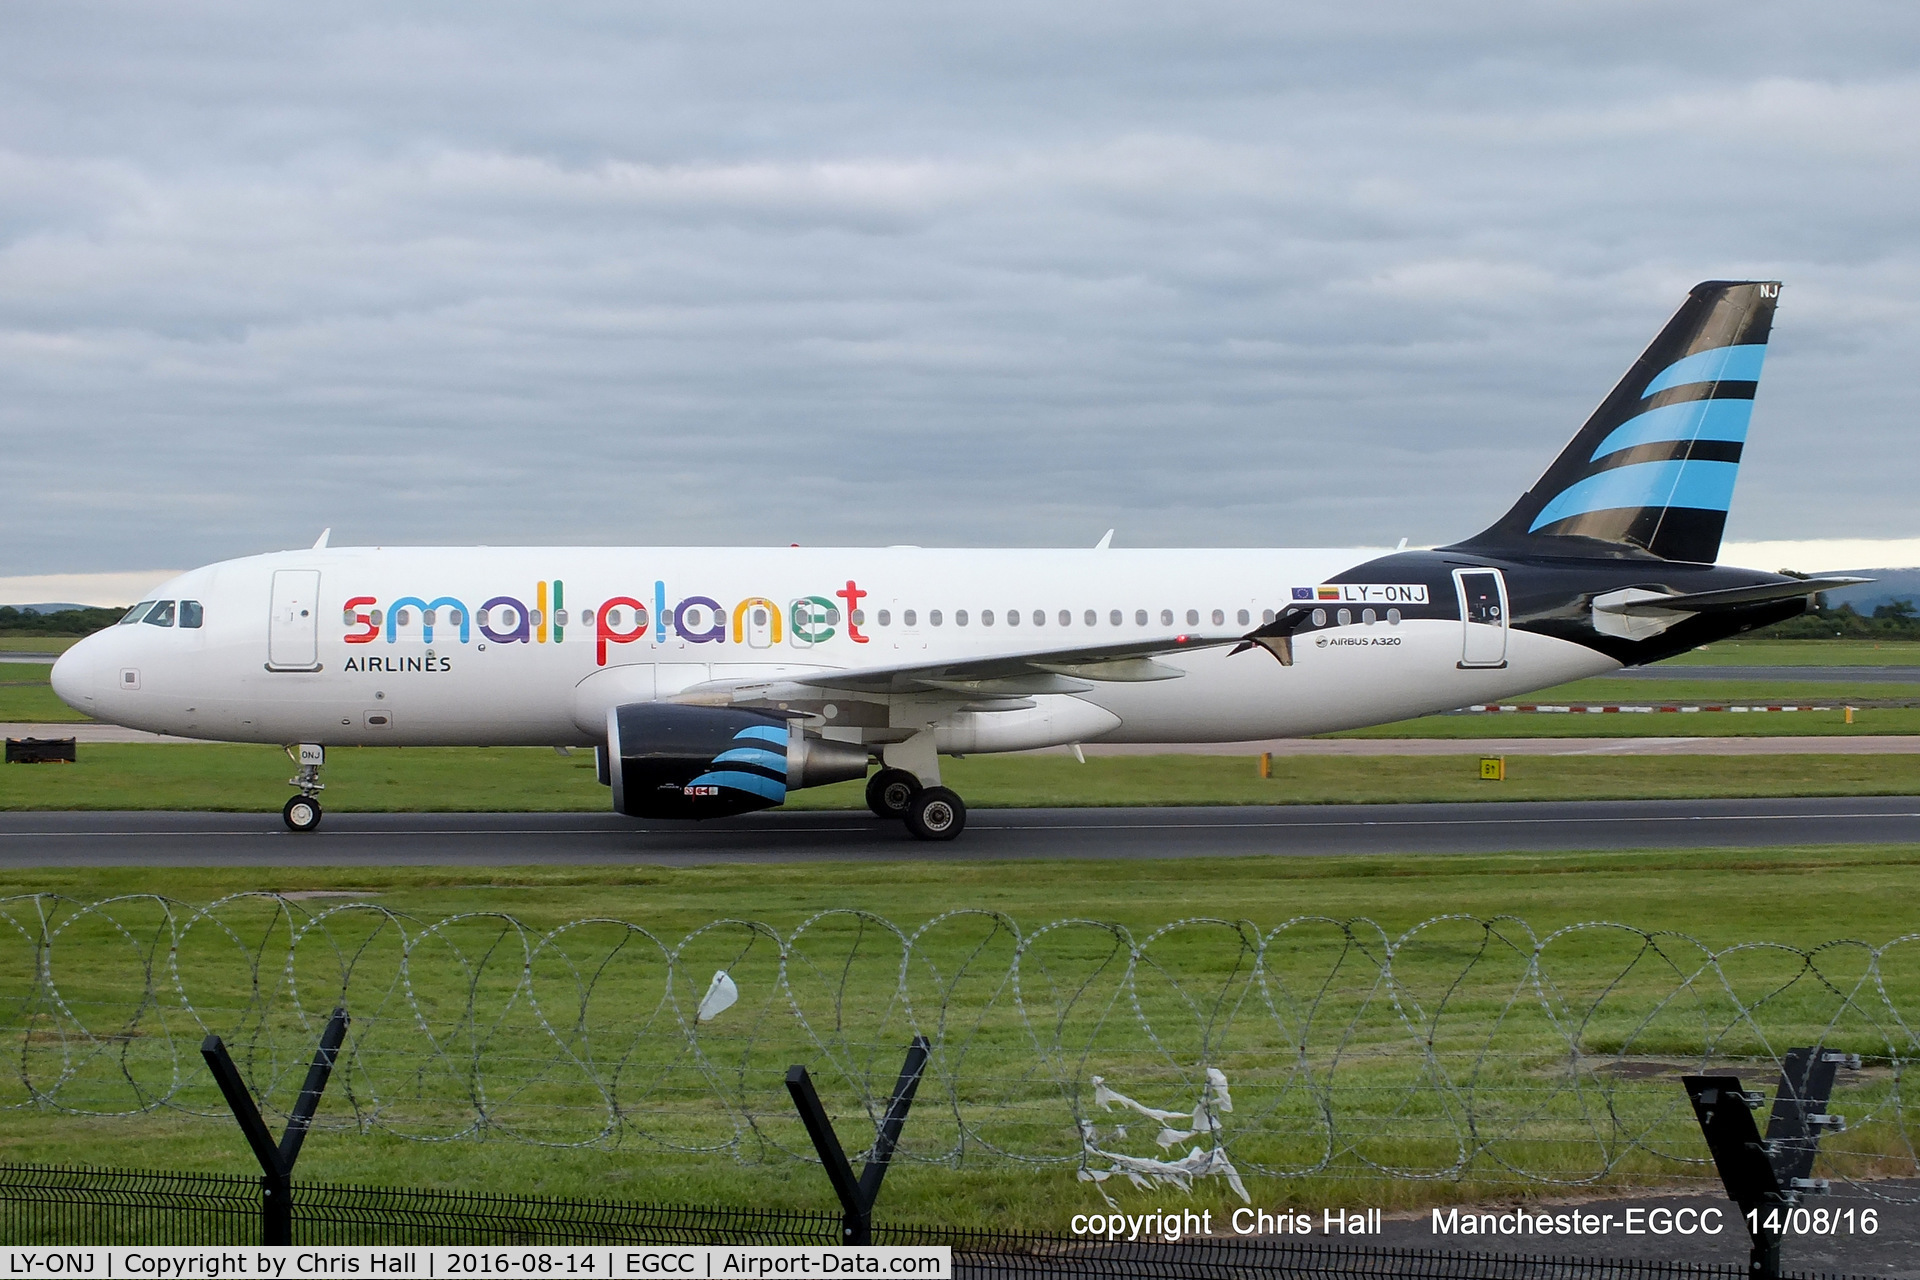 LY-ONJ, 2010 Airbus A320-214 C/N 4203, Small Planet Airlines